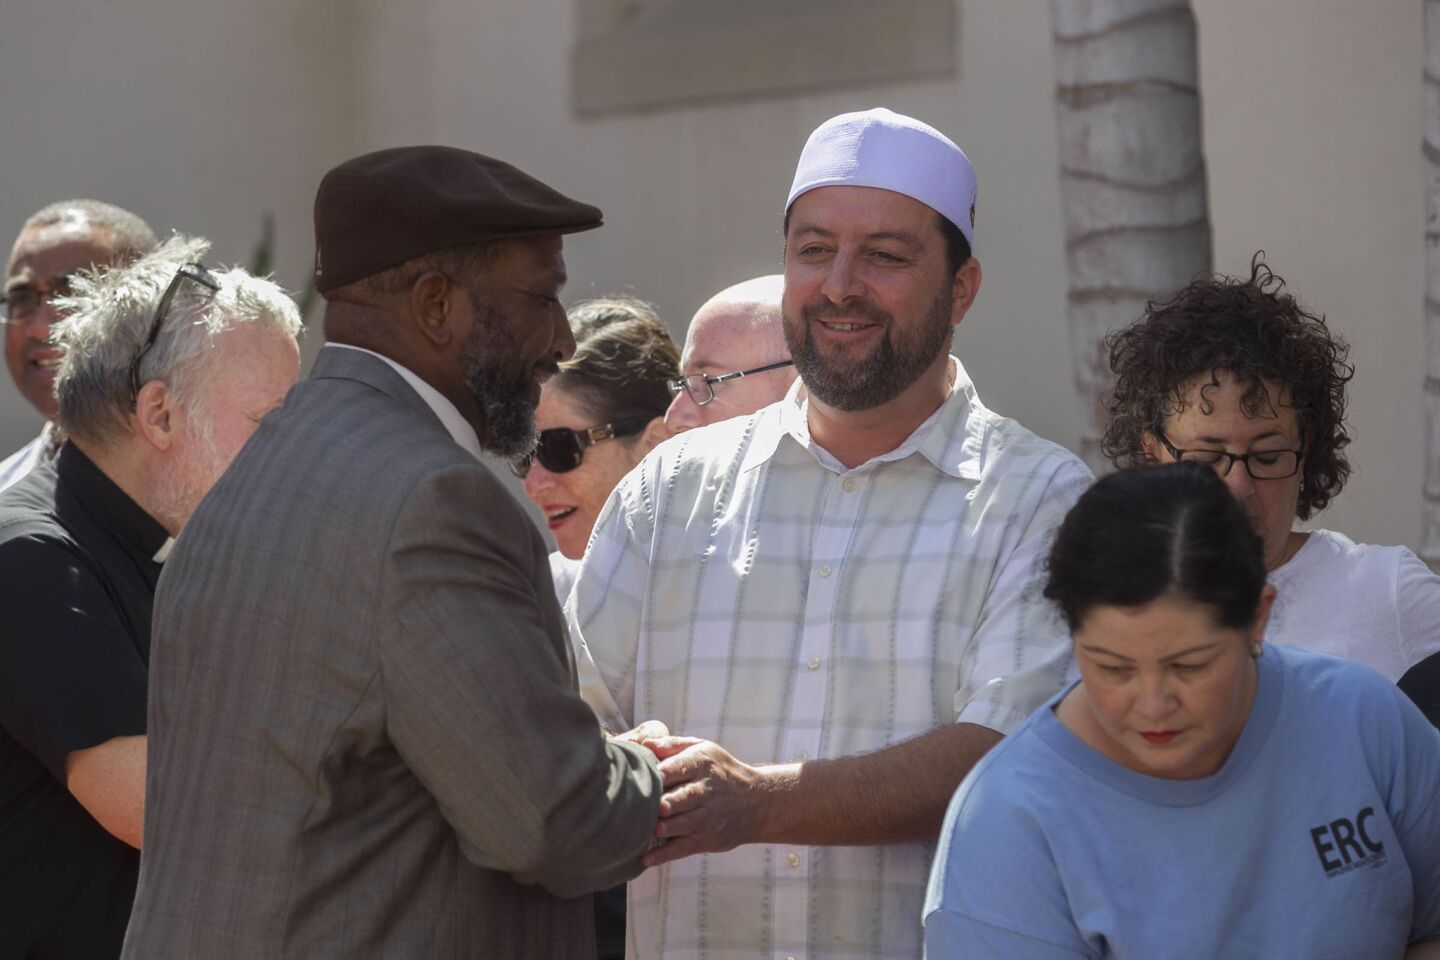 Imam Taha Hassane, right, of the Islamic Center of San Diego, greeted Bishop Cornelius Bowser, left, of the Charity Apostolic Church.